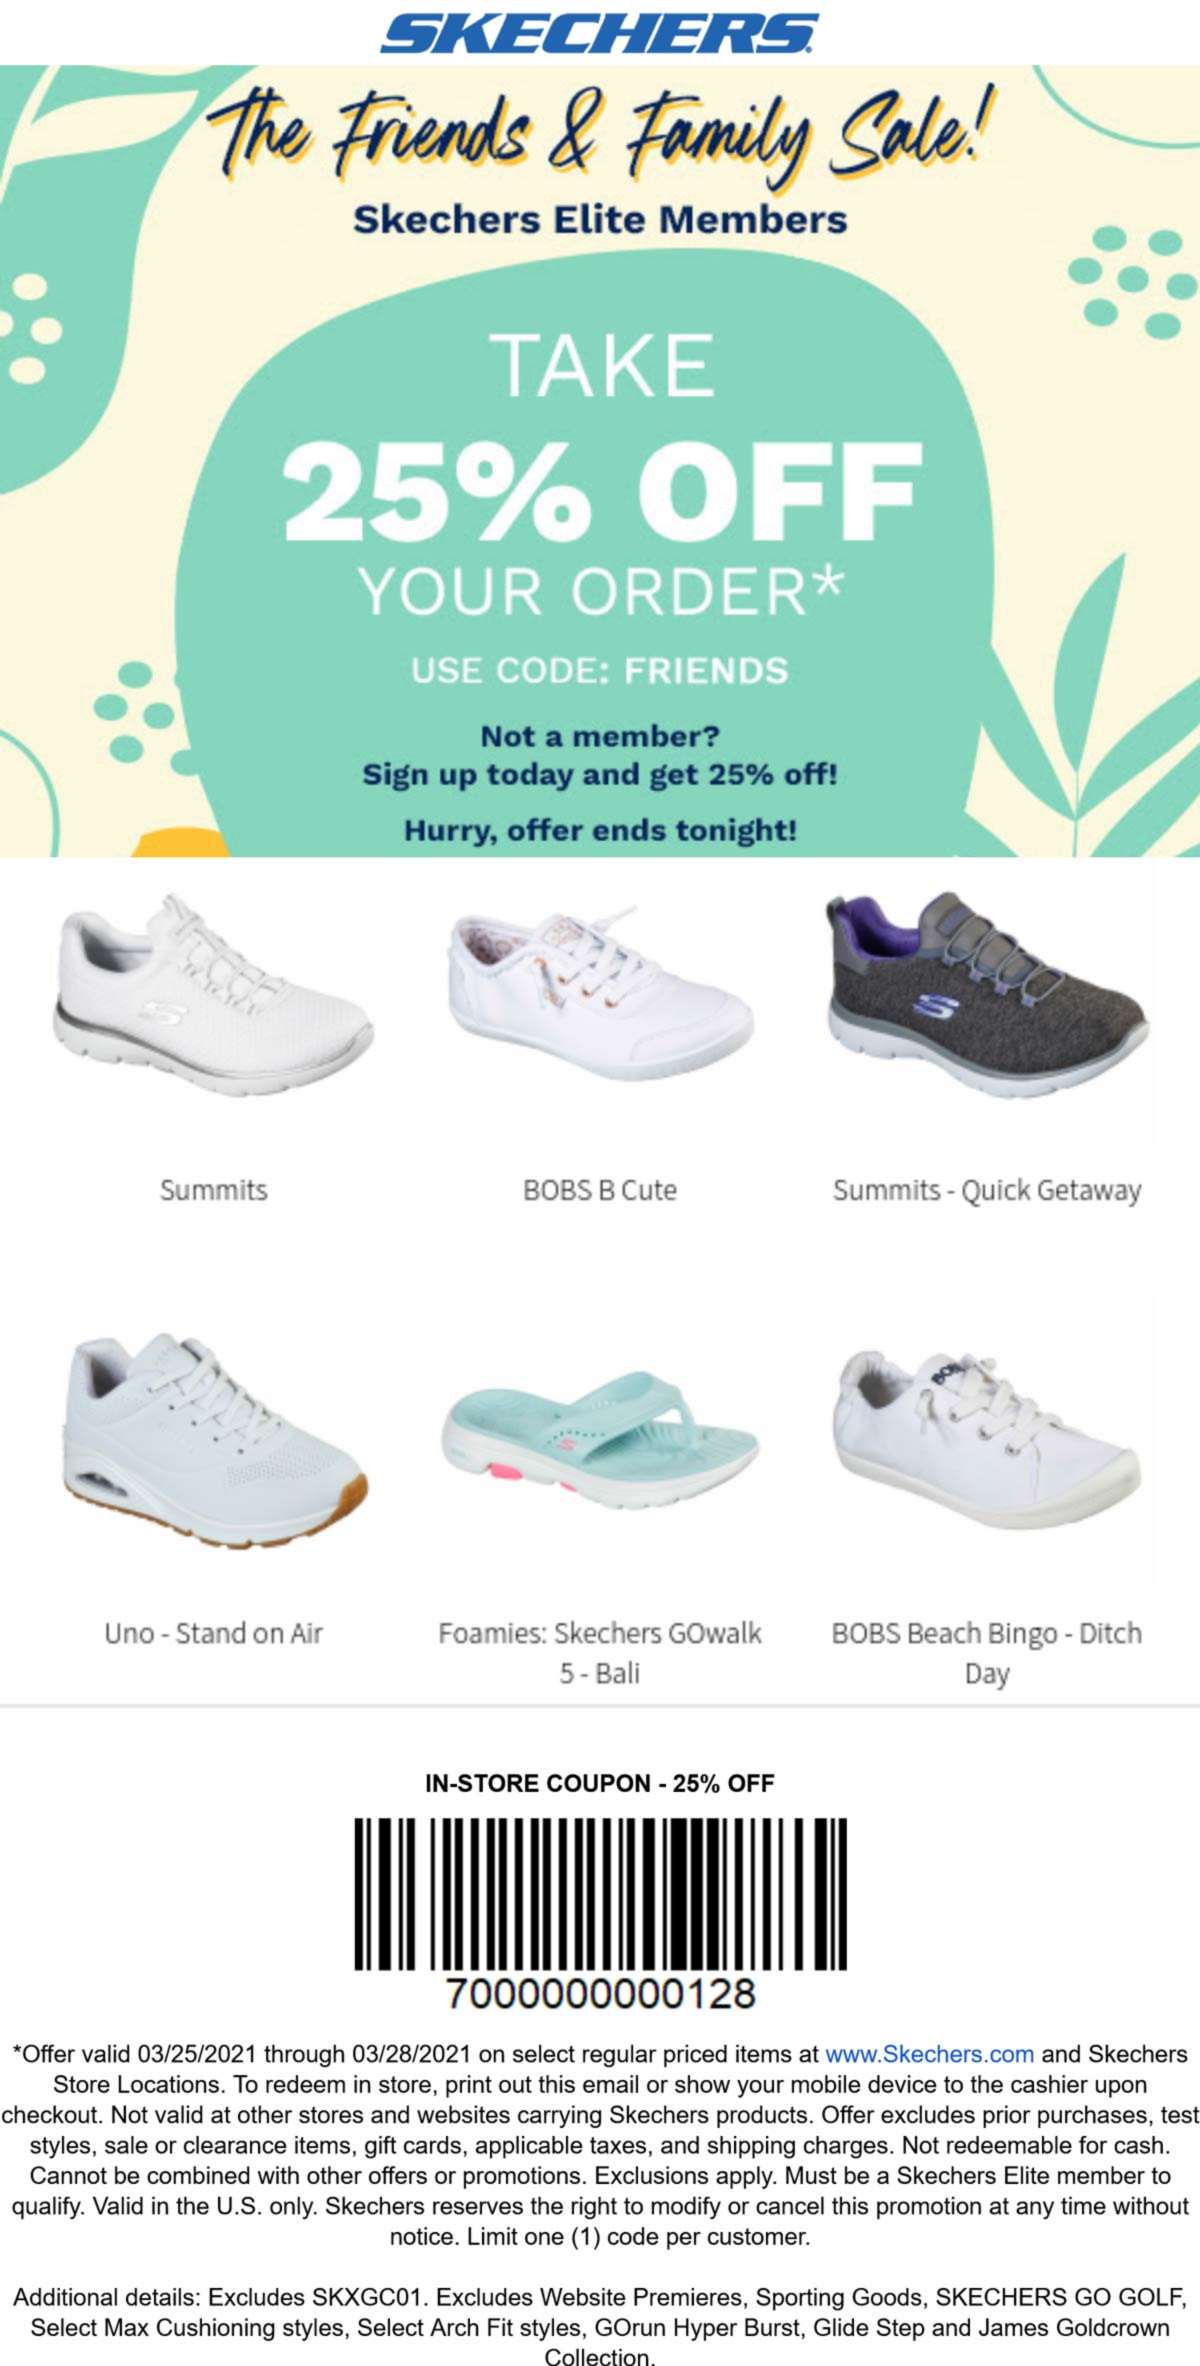 Skechers stores Coupon  25% off today at Skechers via promo code FRIENDS #skechers 